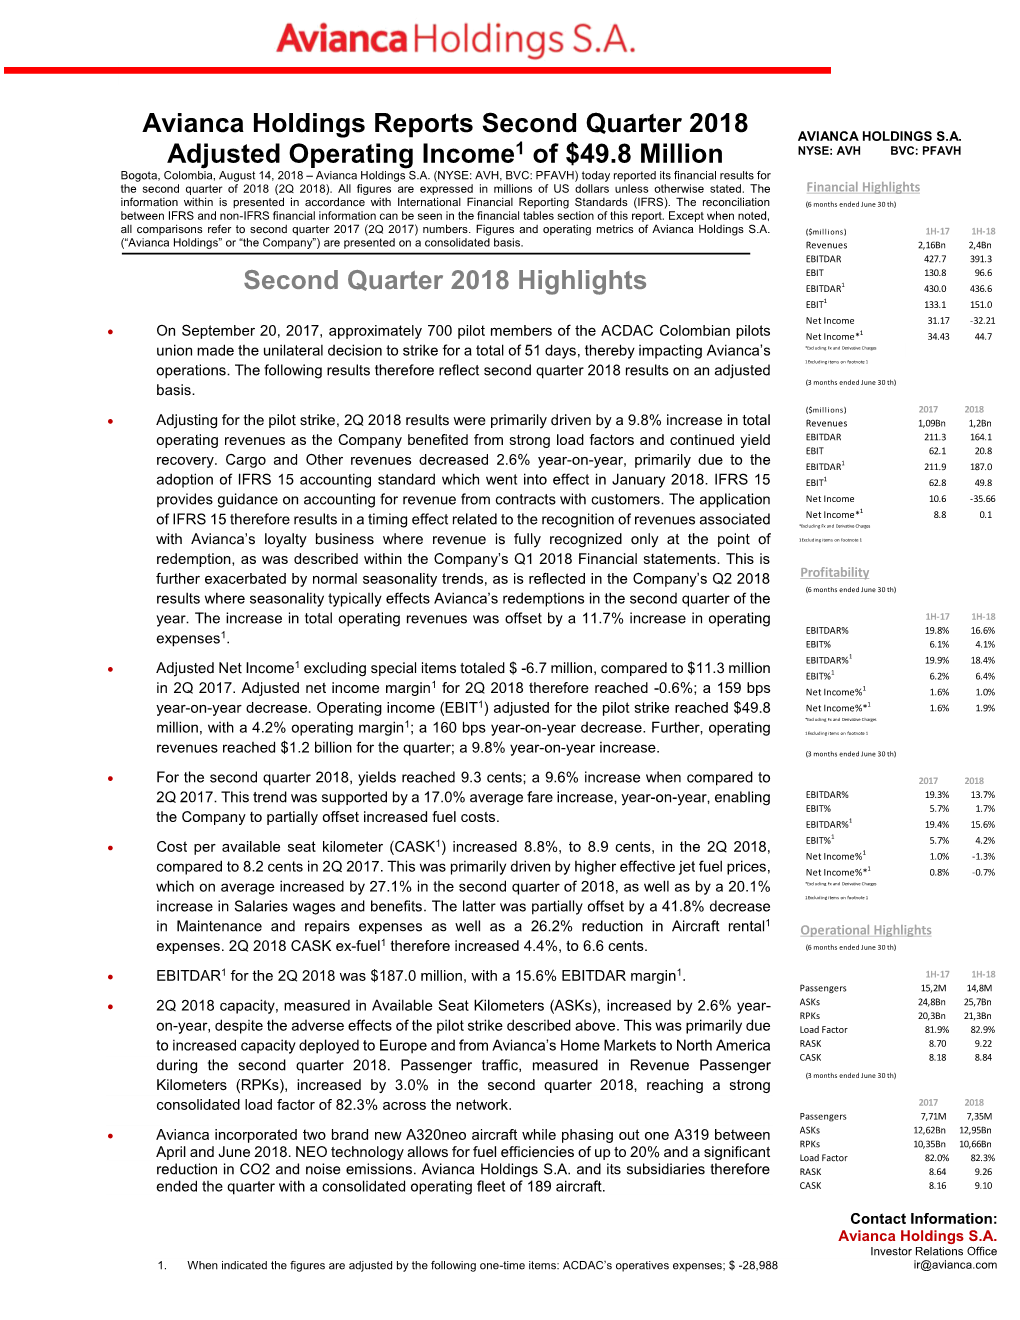 Avianca Holdings Reports Second Quarter 2018 Adjusted Operating Income1 of $49.8 Million Second Quarter 2018 Highlights